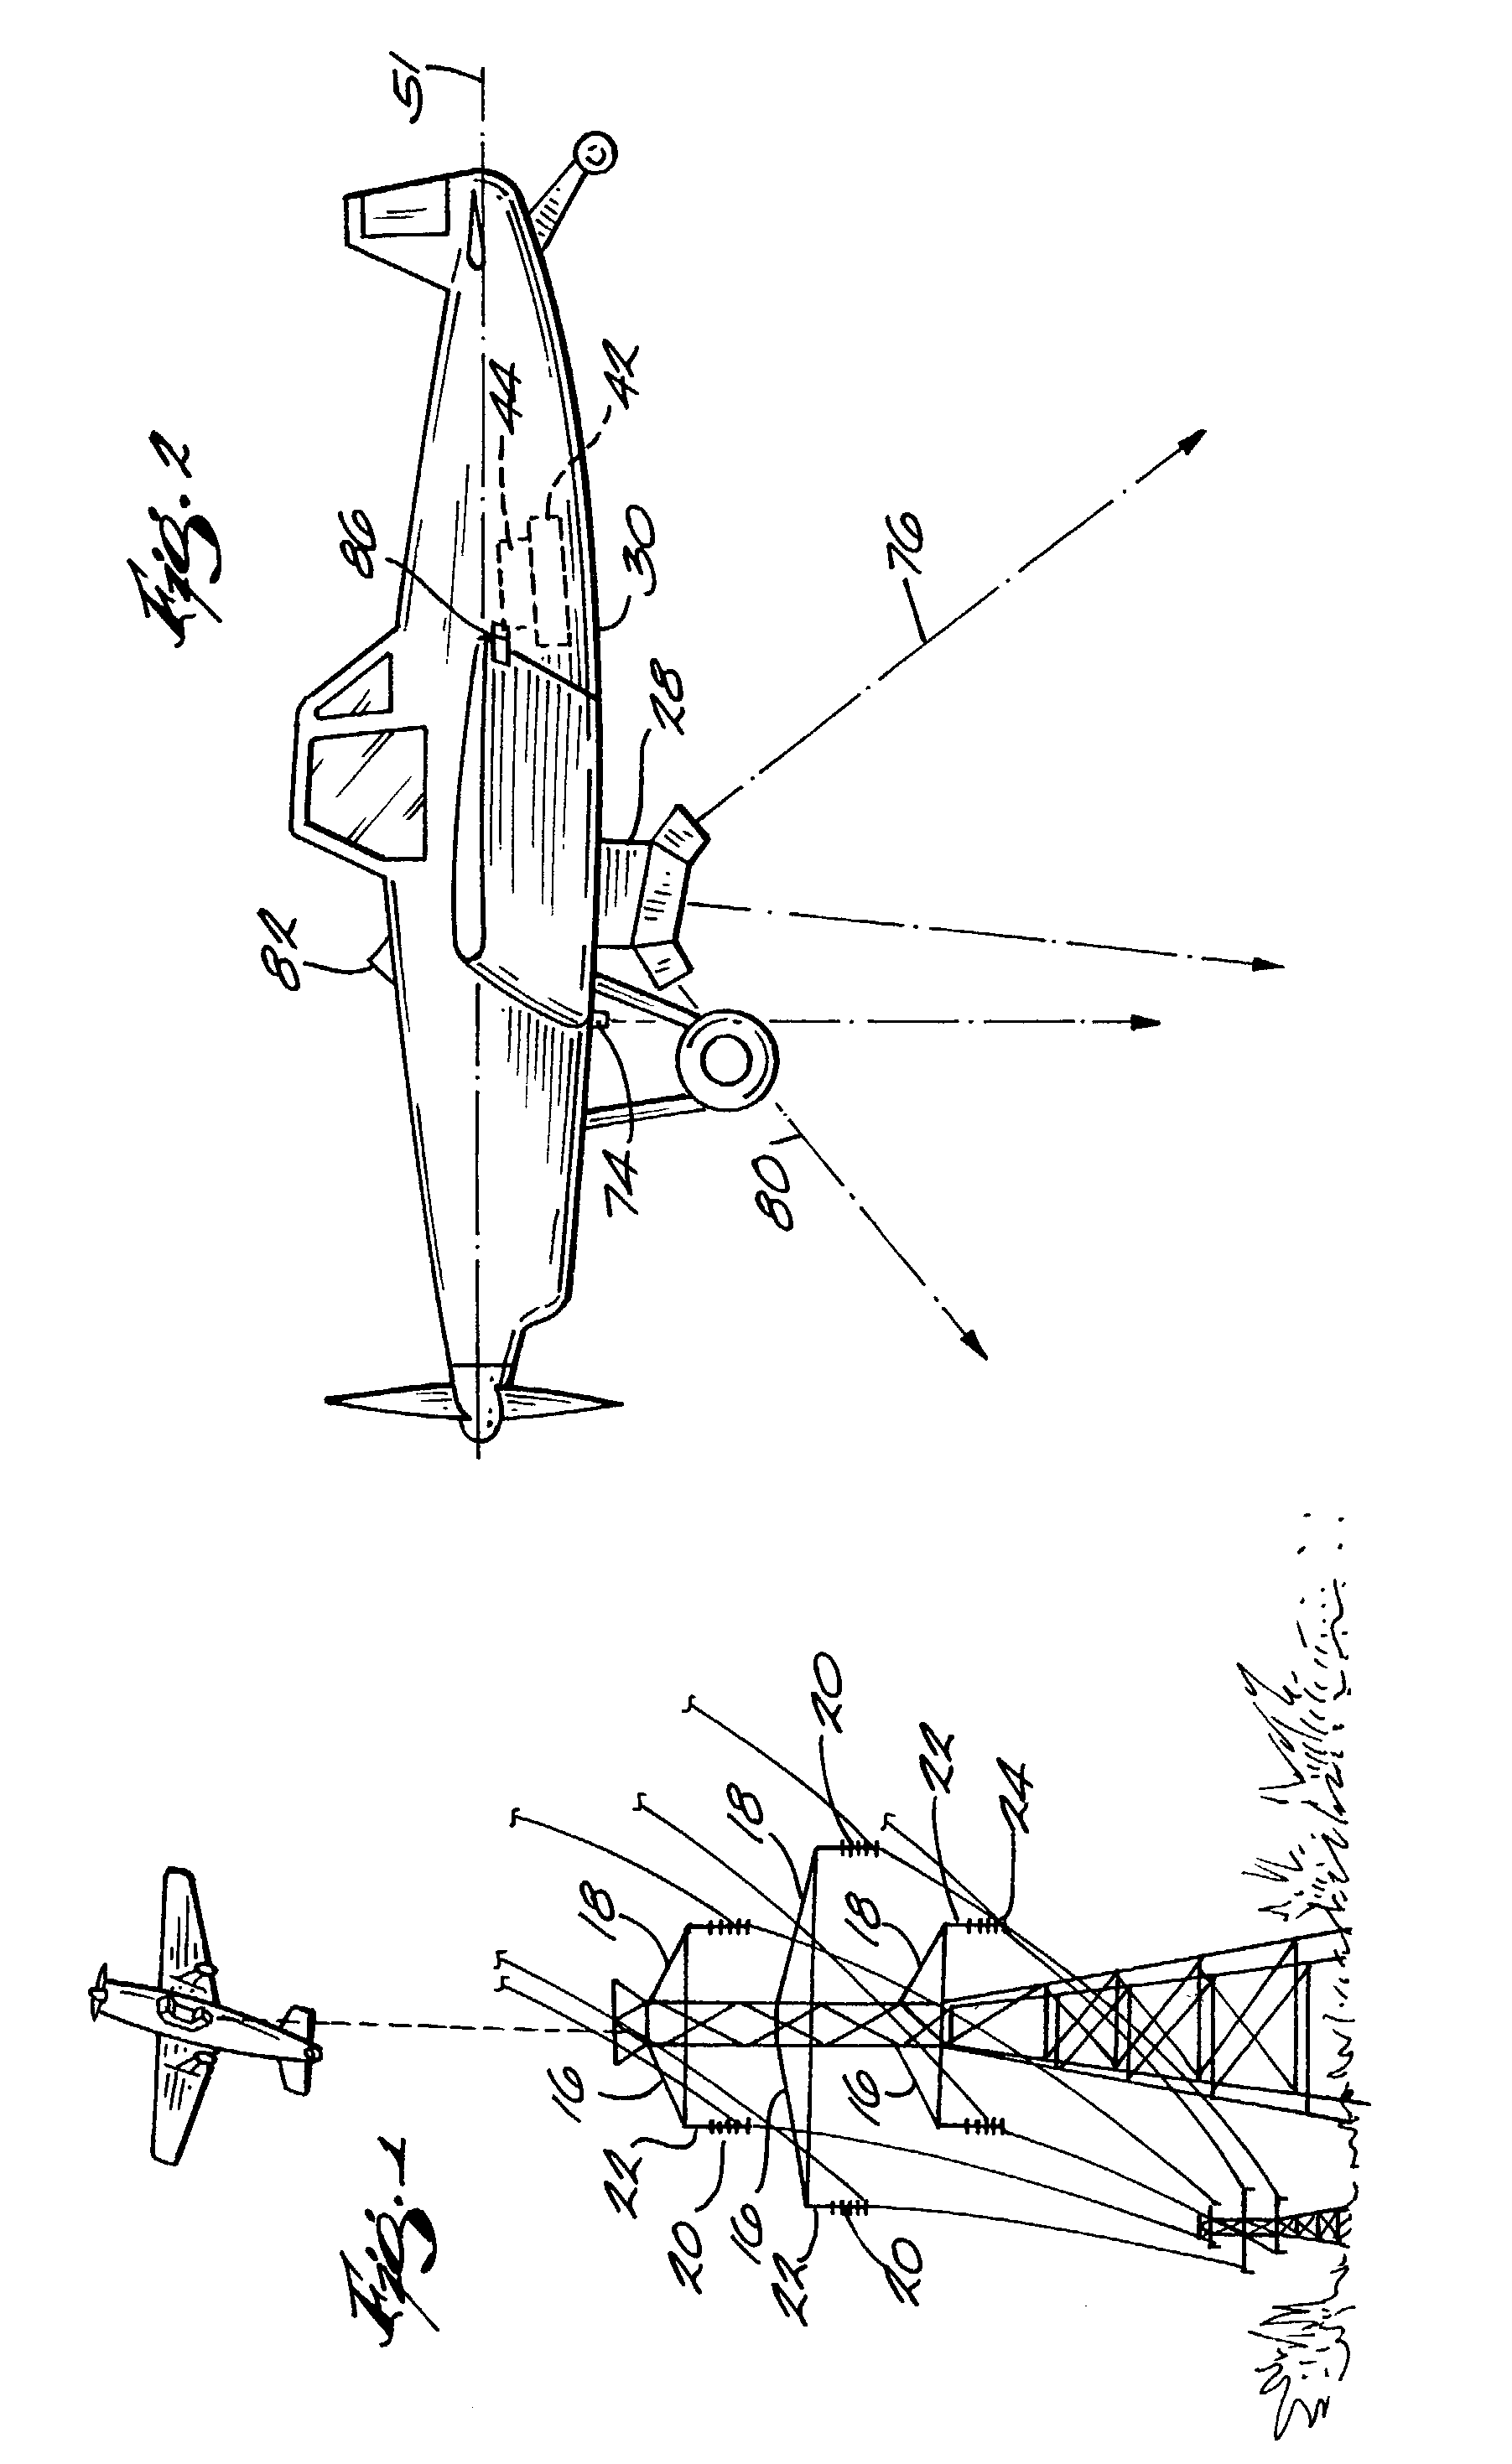 Airborne inventory and inspection system and apparatus